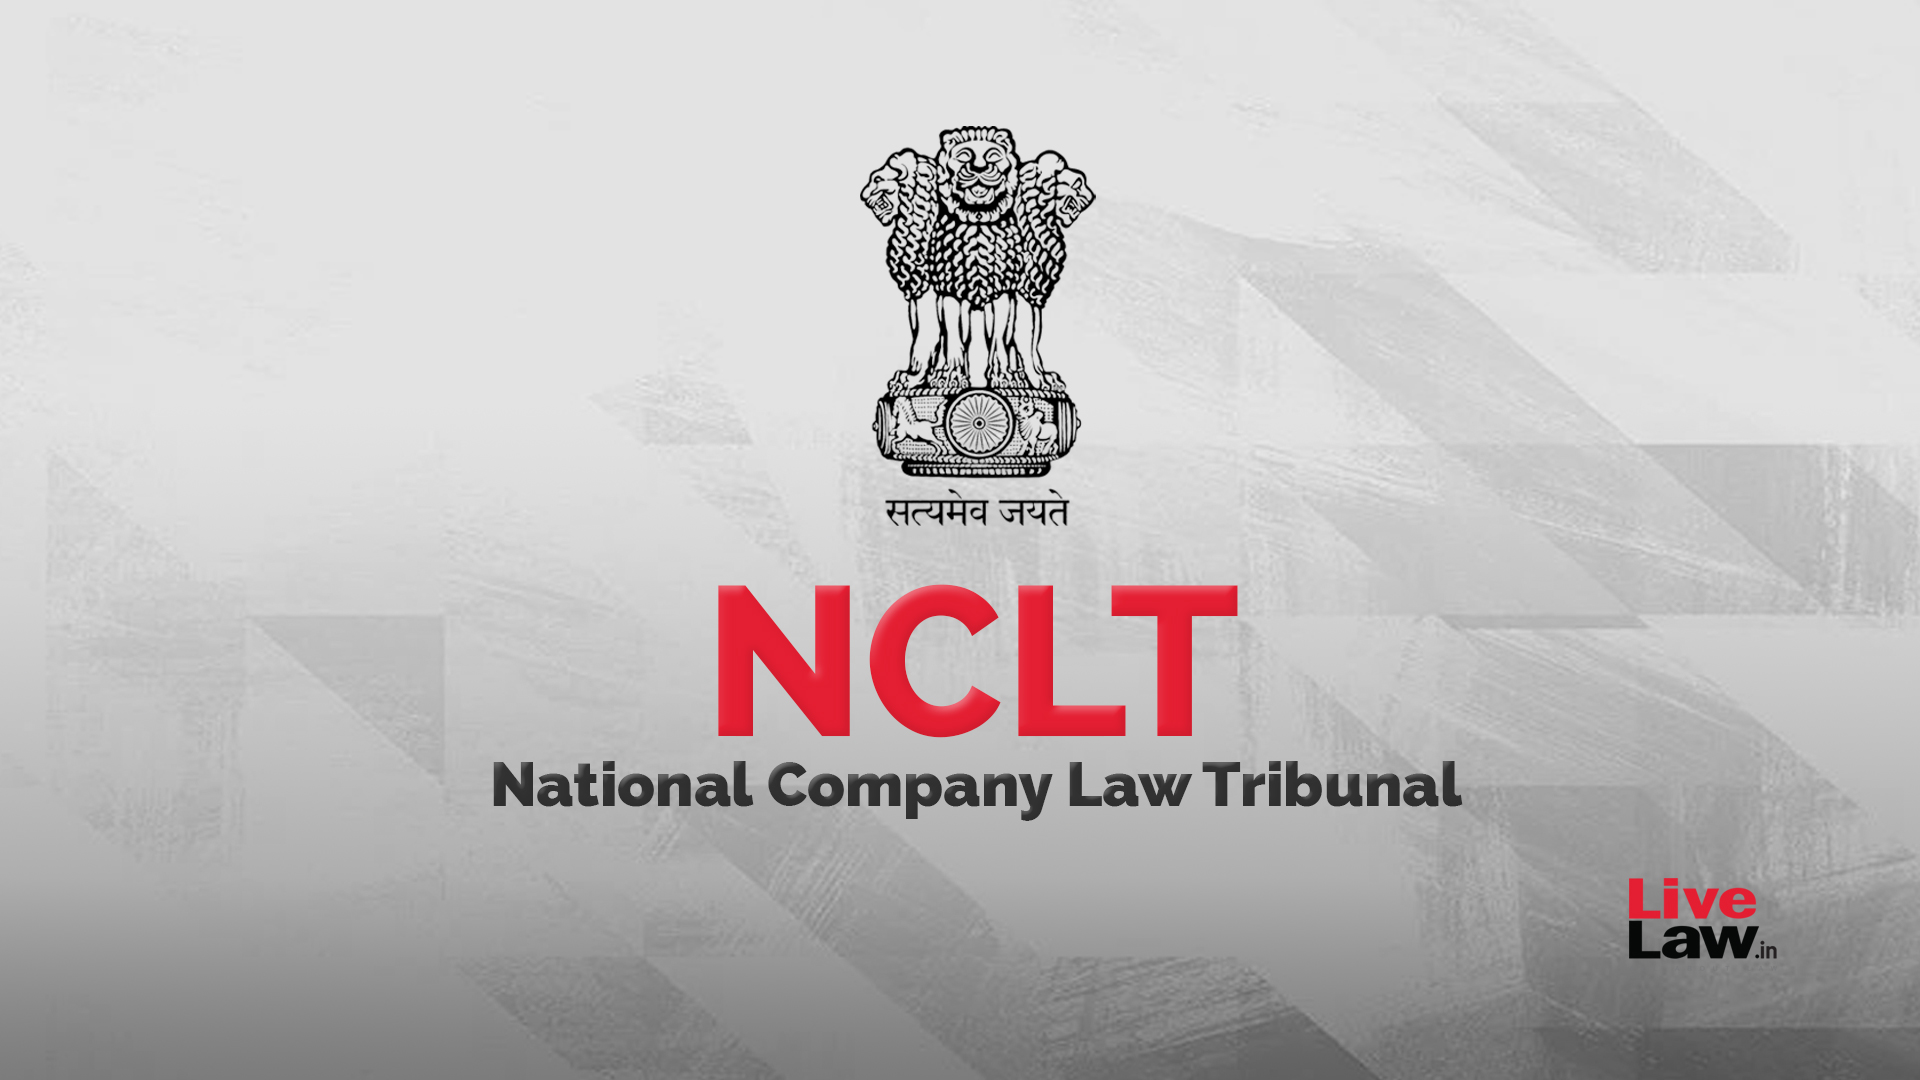 Sale Of Corporate Debtor As A Going Concern Includes Both Assets And Liabilities: NCLT Mumbai